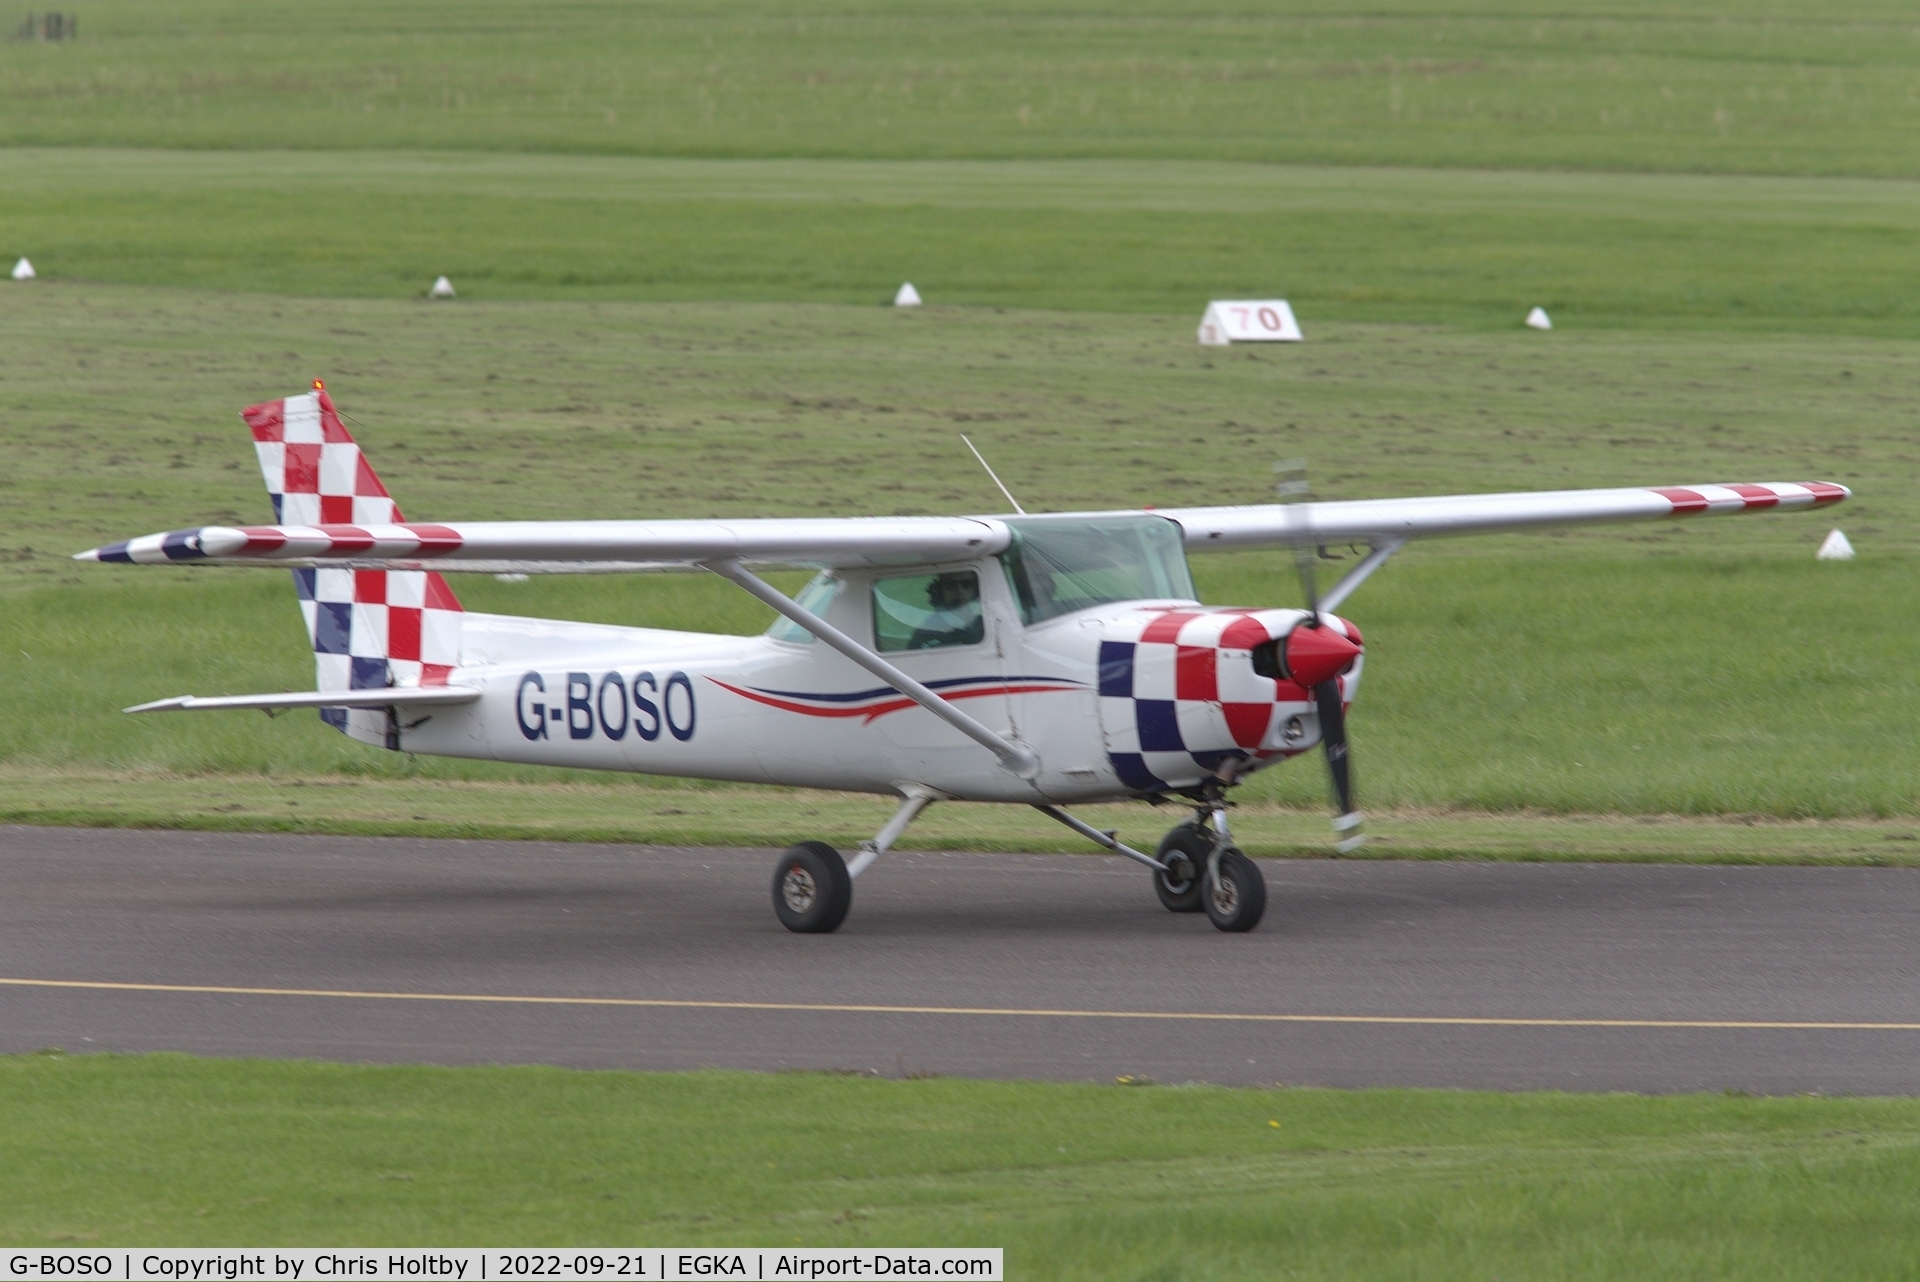 G-BOSO, 1981 Cessna A152 Aerobat C/N A152-0975, Taxiing for take-off at Shoreham Airport, Sussex.